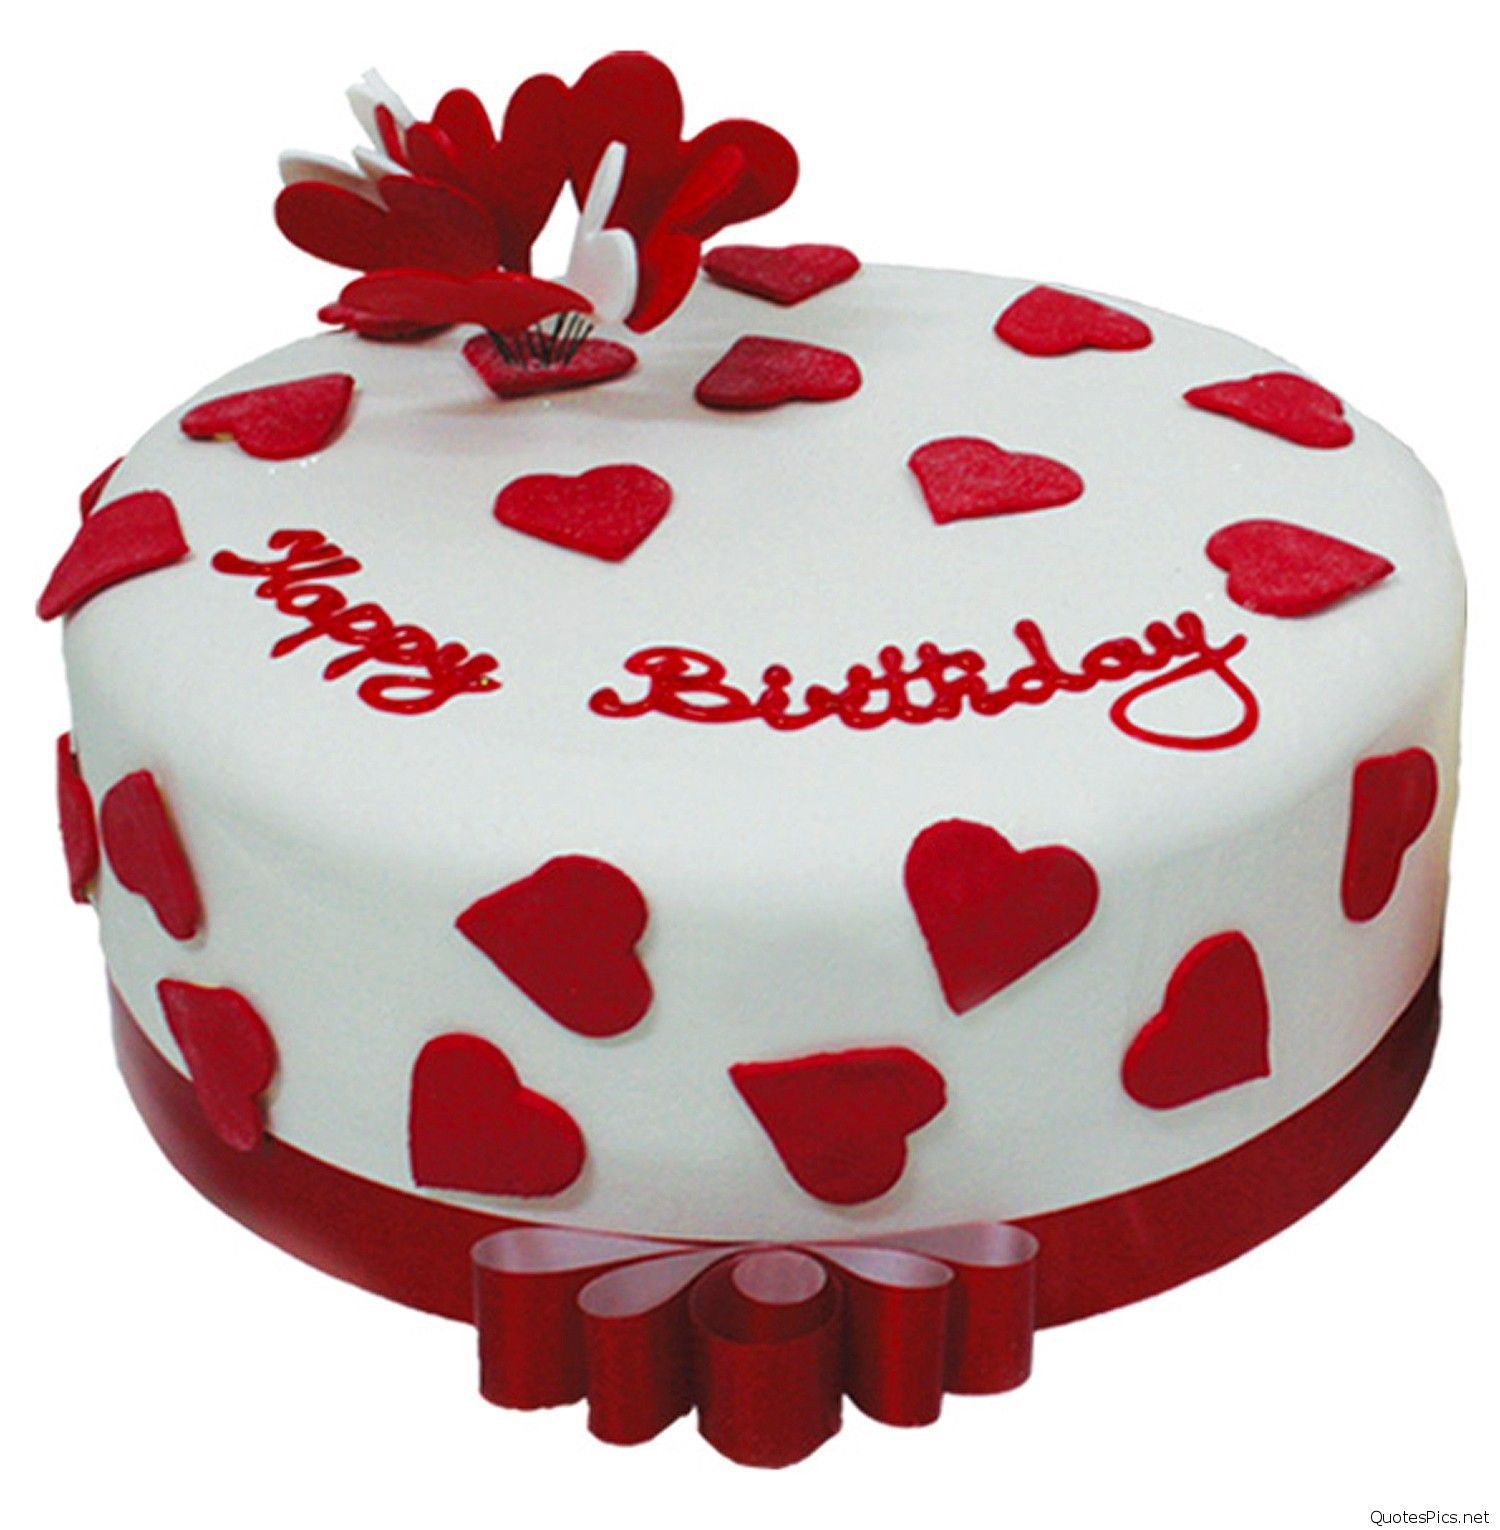 Birthday Cake Wallpaper With Name On - Birthday Cake With Hearts , HD Wallpaper & Backgrounds